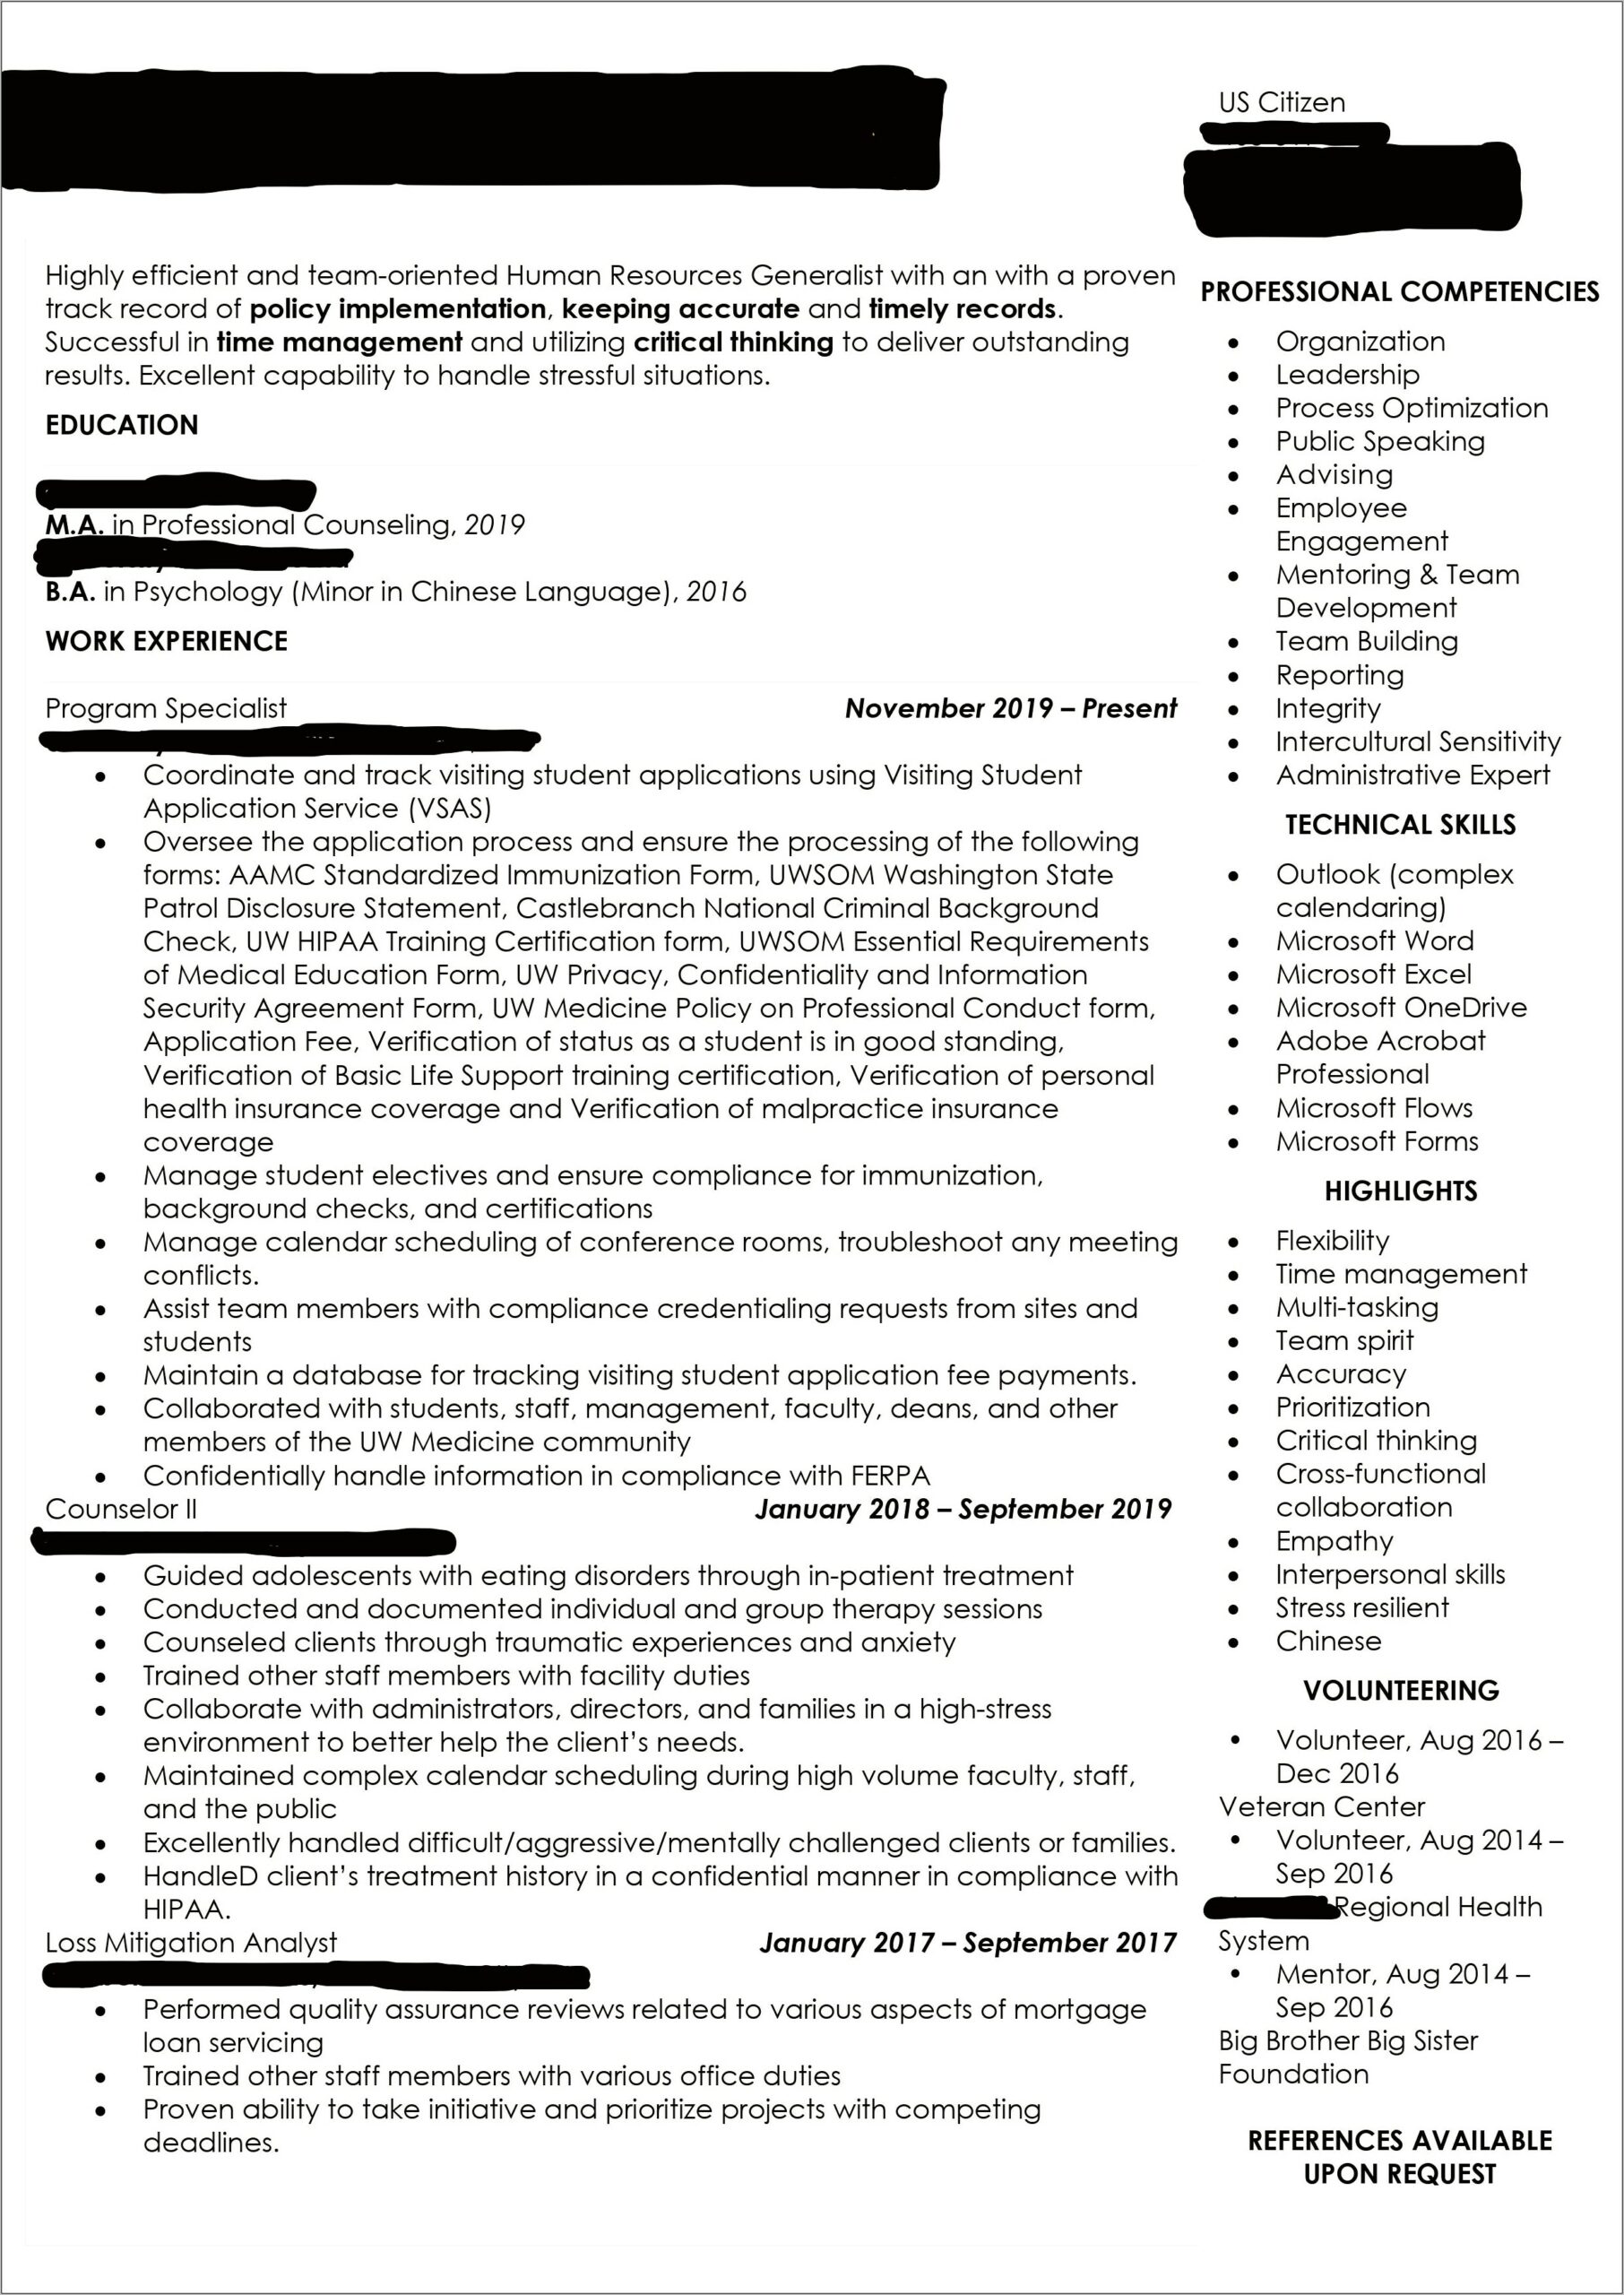 Resume Skills And Competencies Flexible